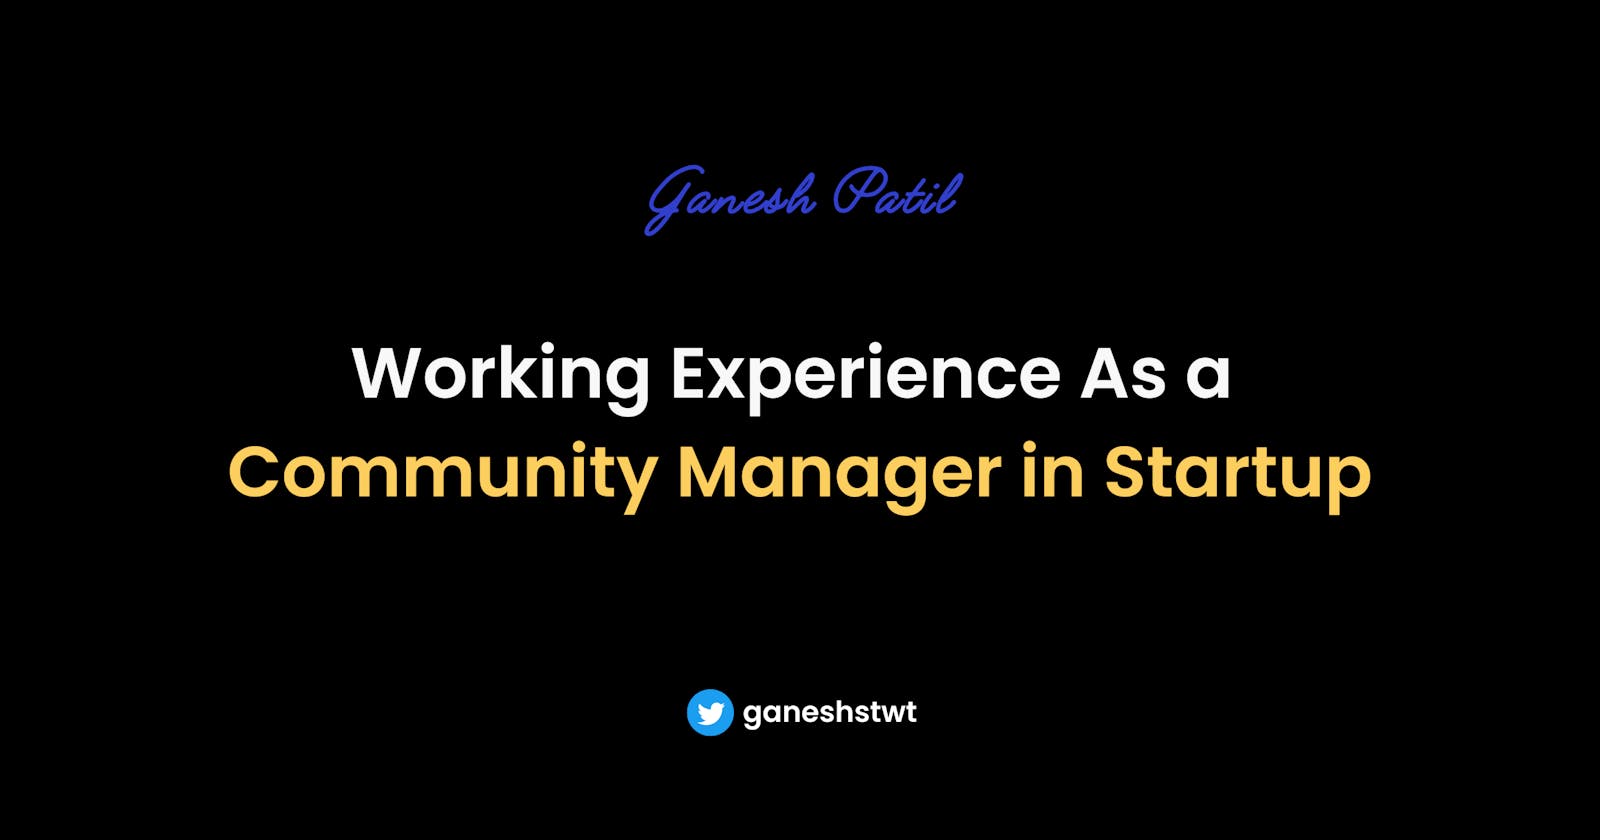 Community Manager Role Insights